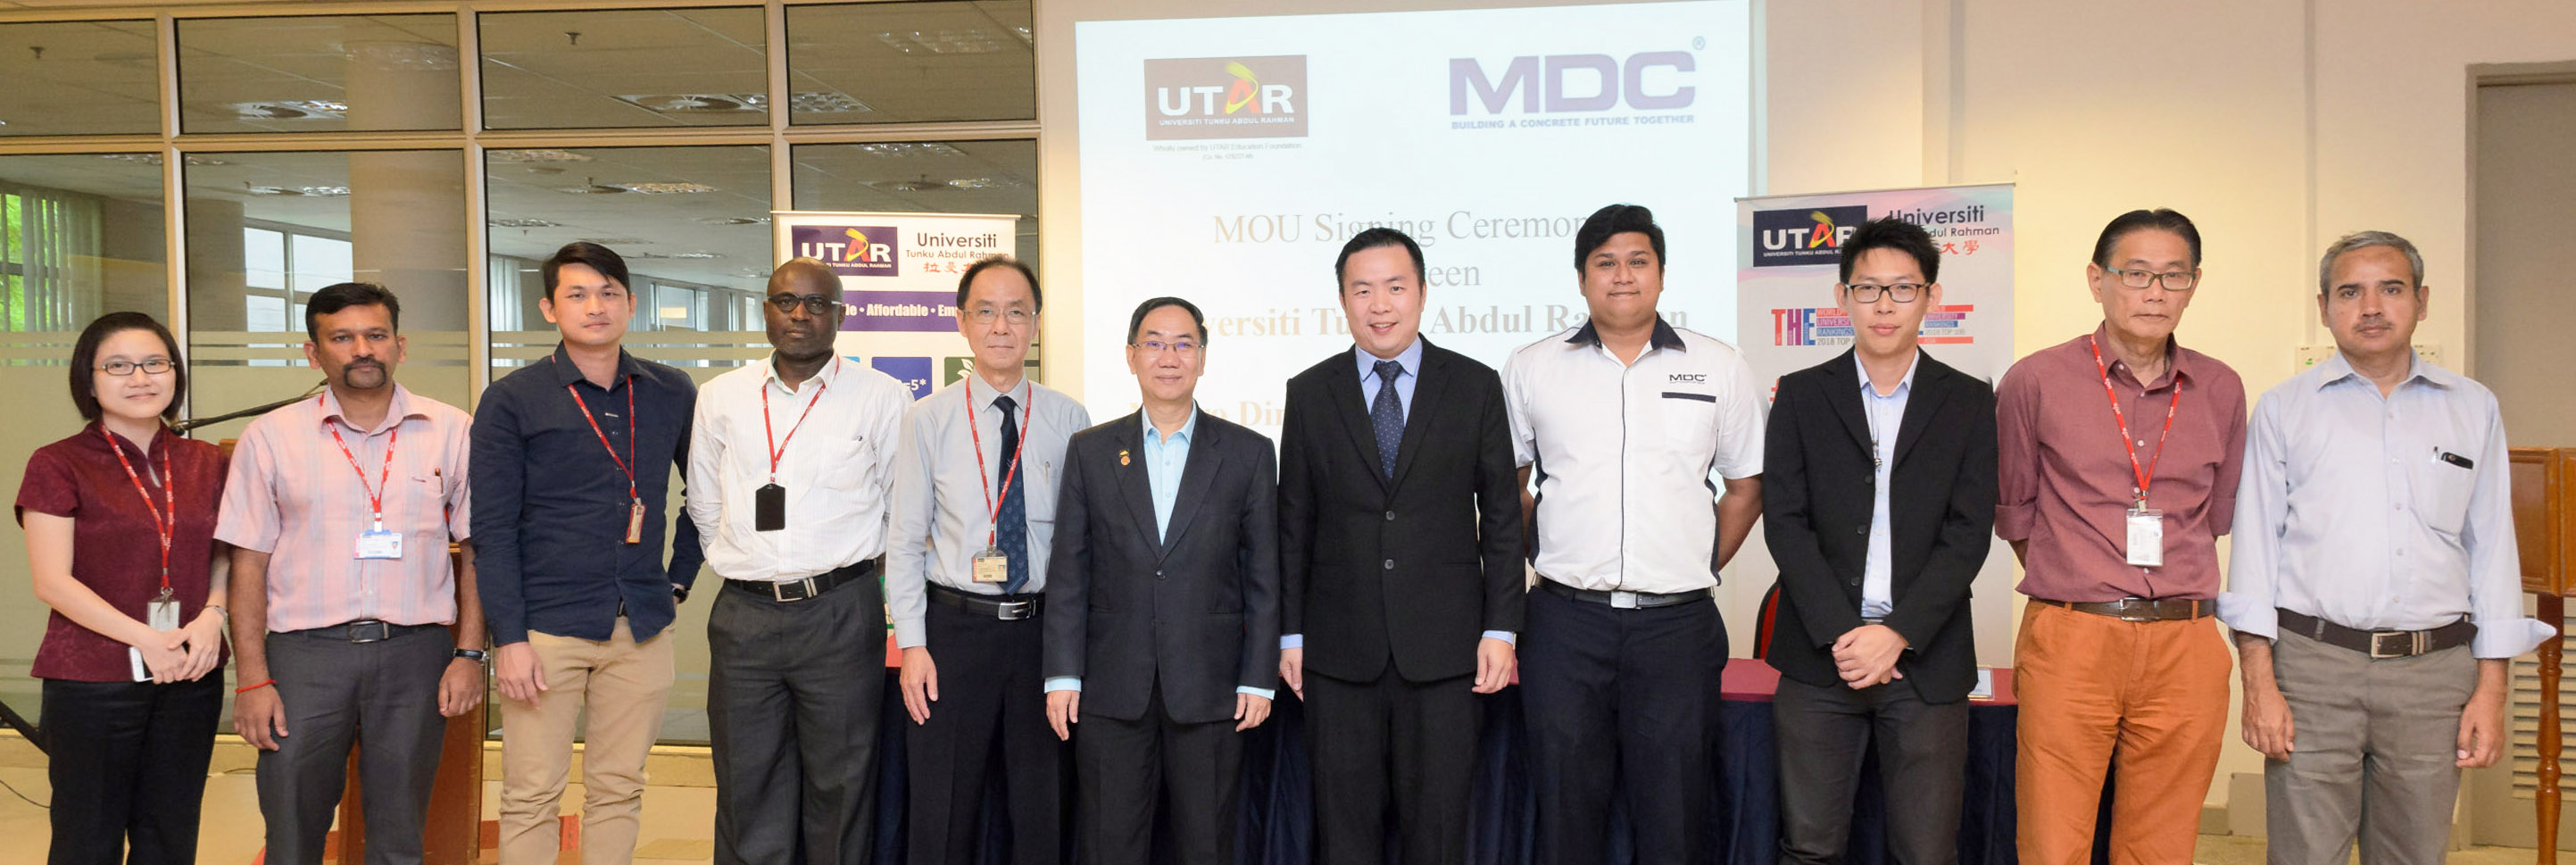 Mou With Mdc Prof Chuah And Leow Exchanging The Mou While Dr Yap Far Left And Gregsson Far Right Look On A Memorandum Of Understanding Mou Between Utar And Macro Dimension Concrete Sdn Bhd Mdc Was Signed On 15 August 2018 At